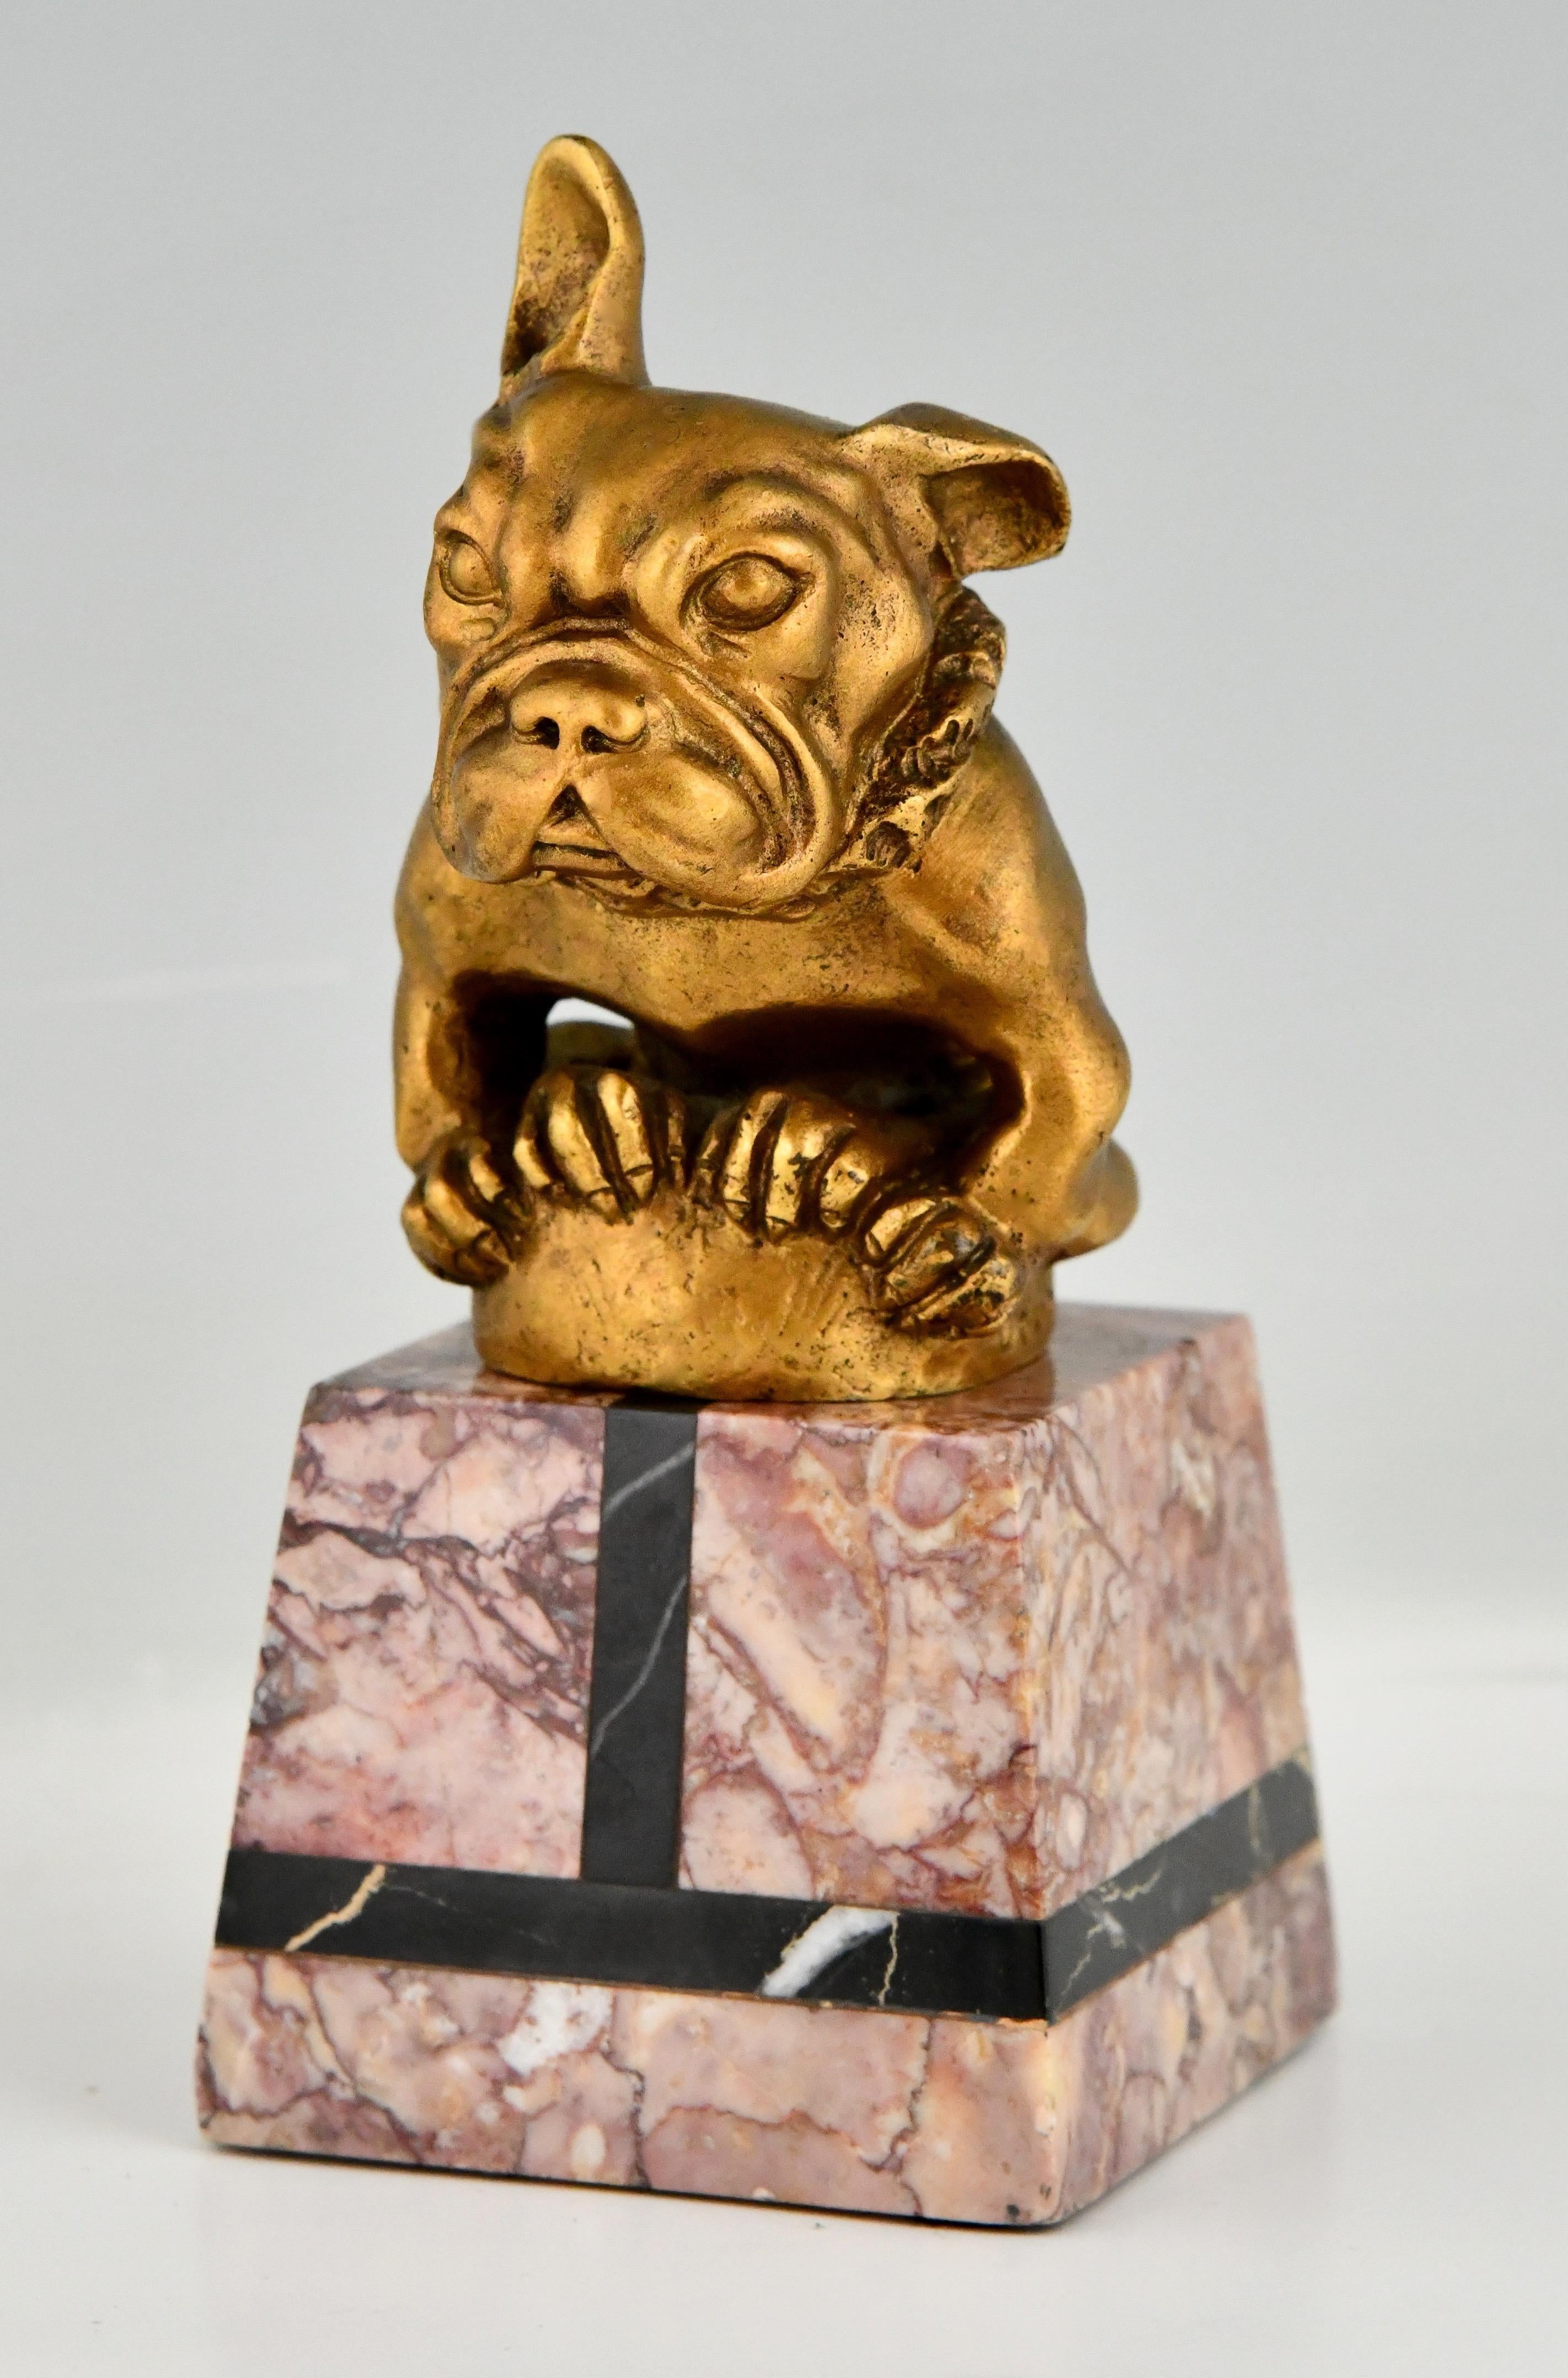 Art Deco bronze car mascot French bulldog signed by Gaston H. Bourcart.
The hood ornament is in gilt bronze and stands on a marble base. 
France 1925.
This mascot is illustrated plate nr. 329 
Mascottes passion, Michel Legrand, Antic show